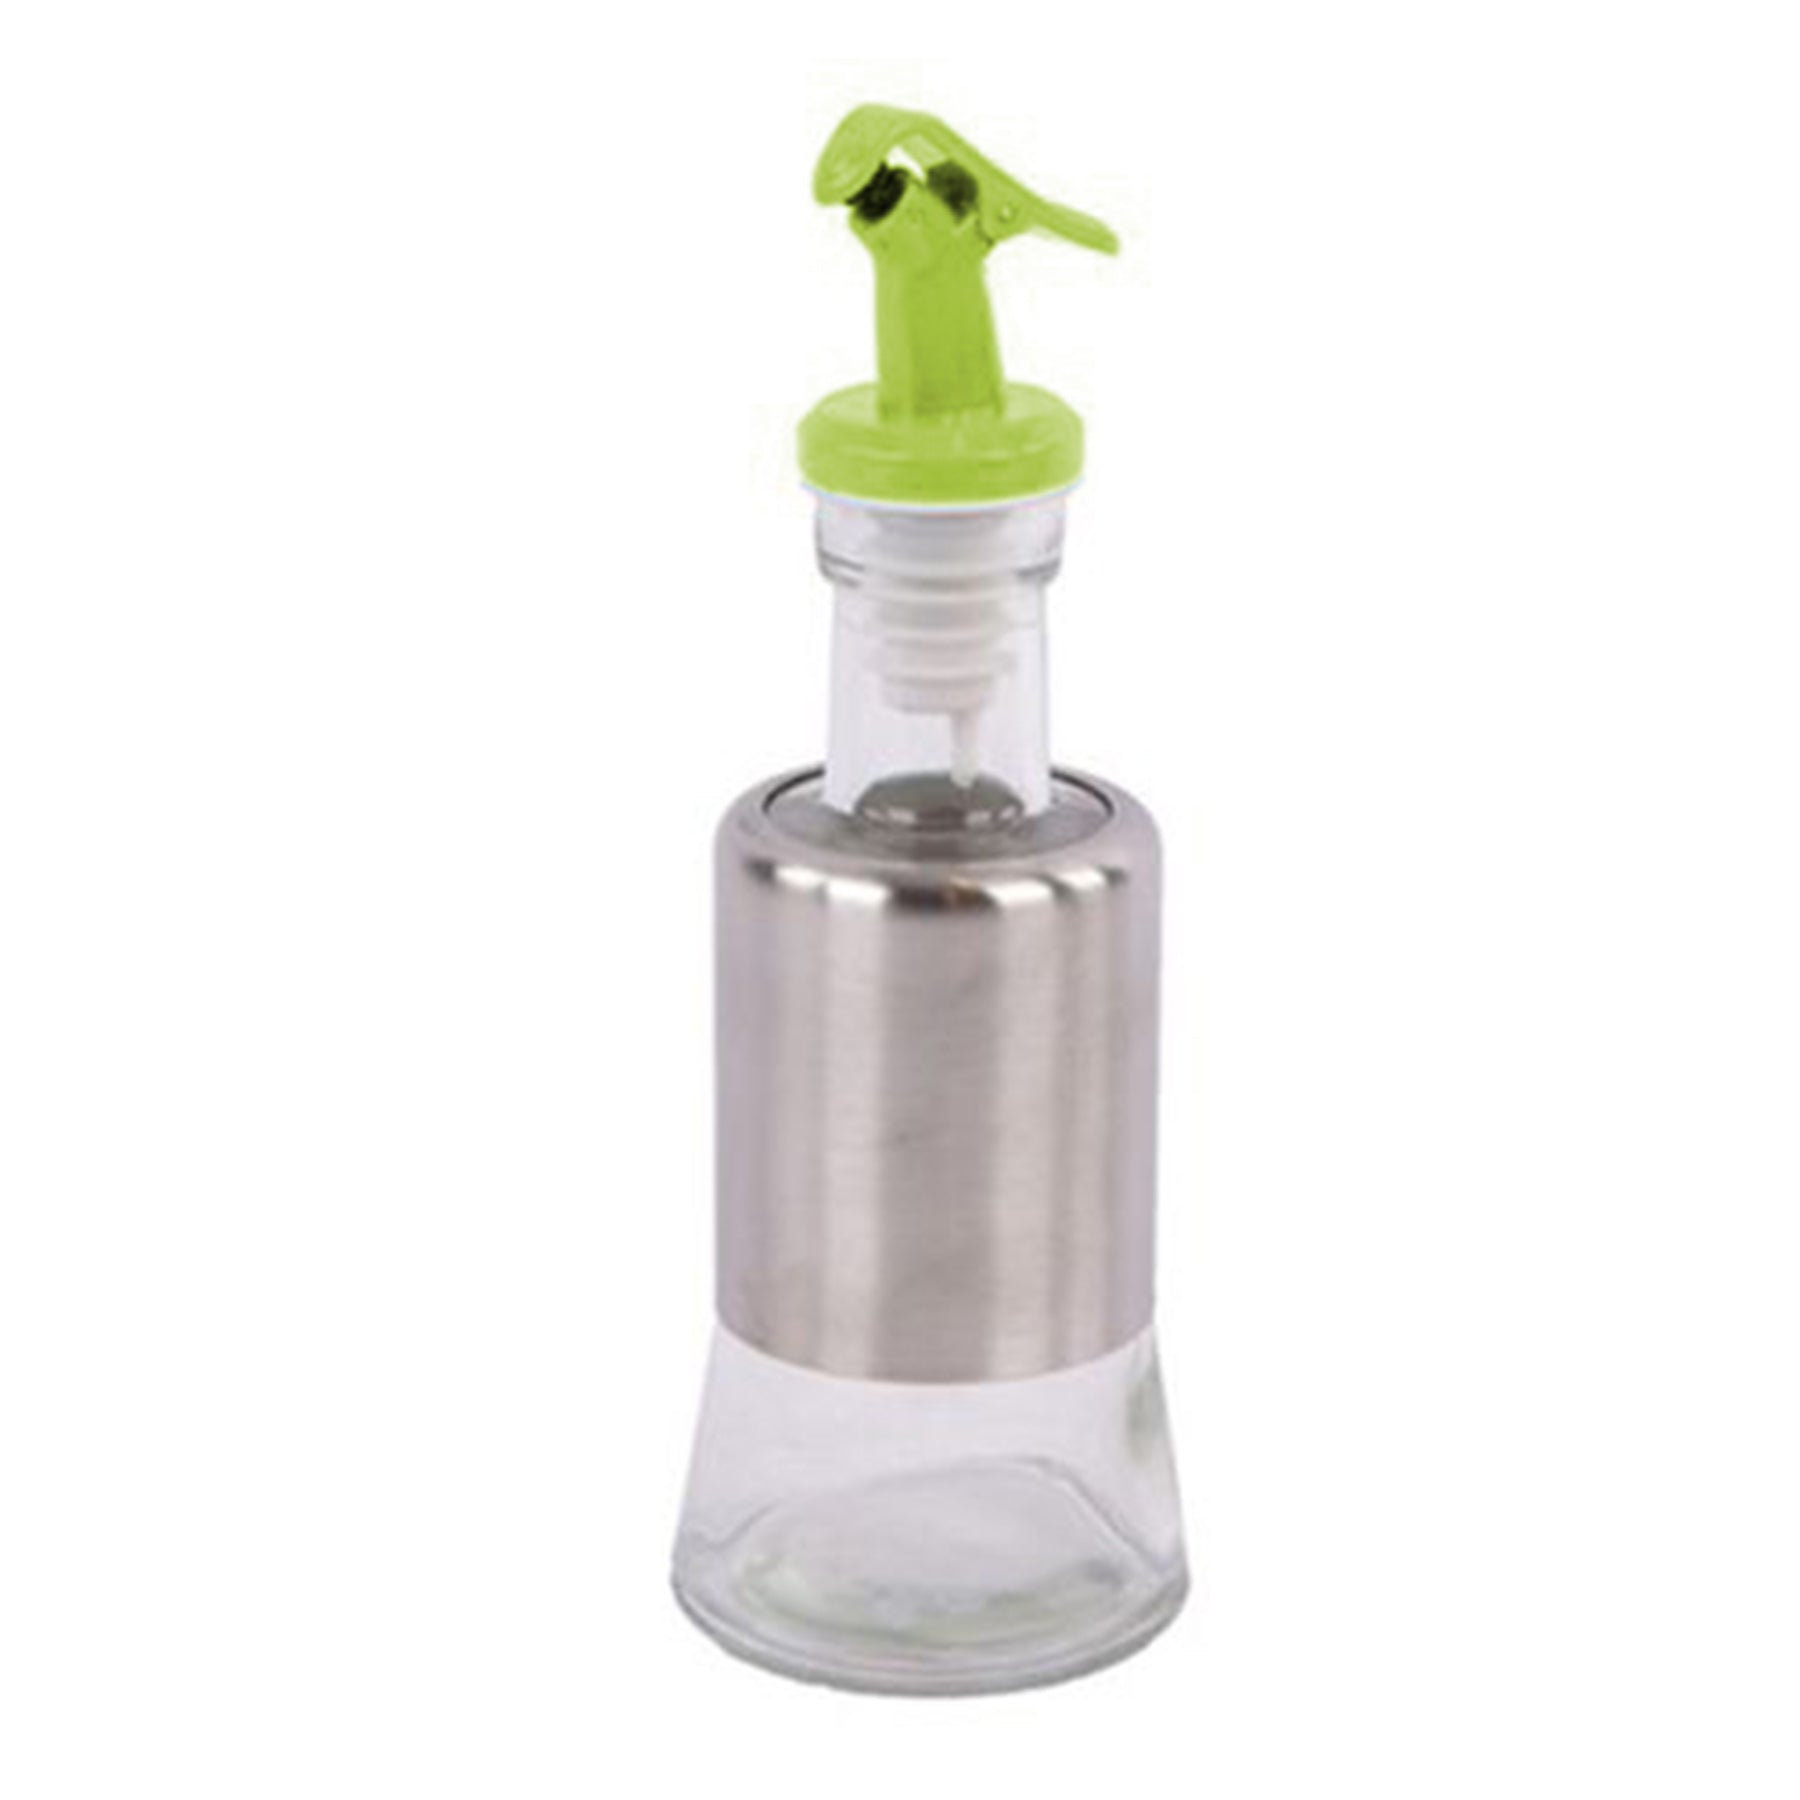 Oil and Vinegar Bottle with green Lid